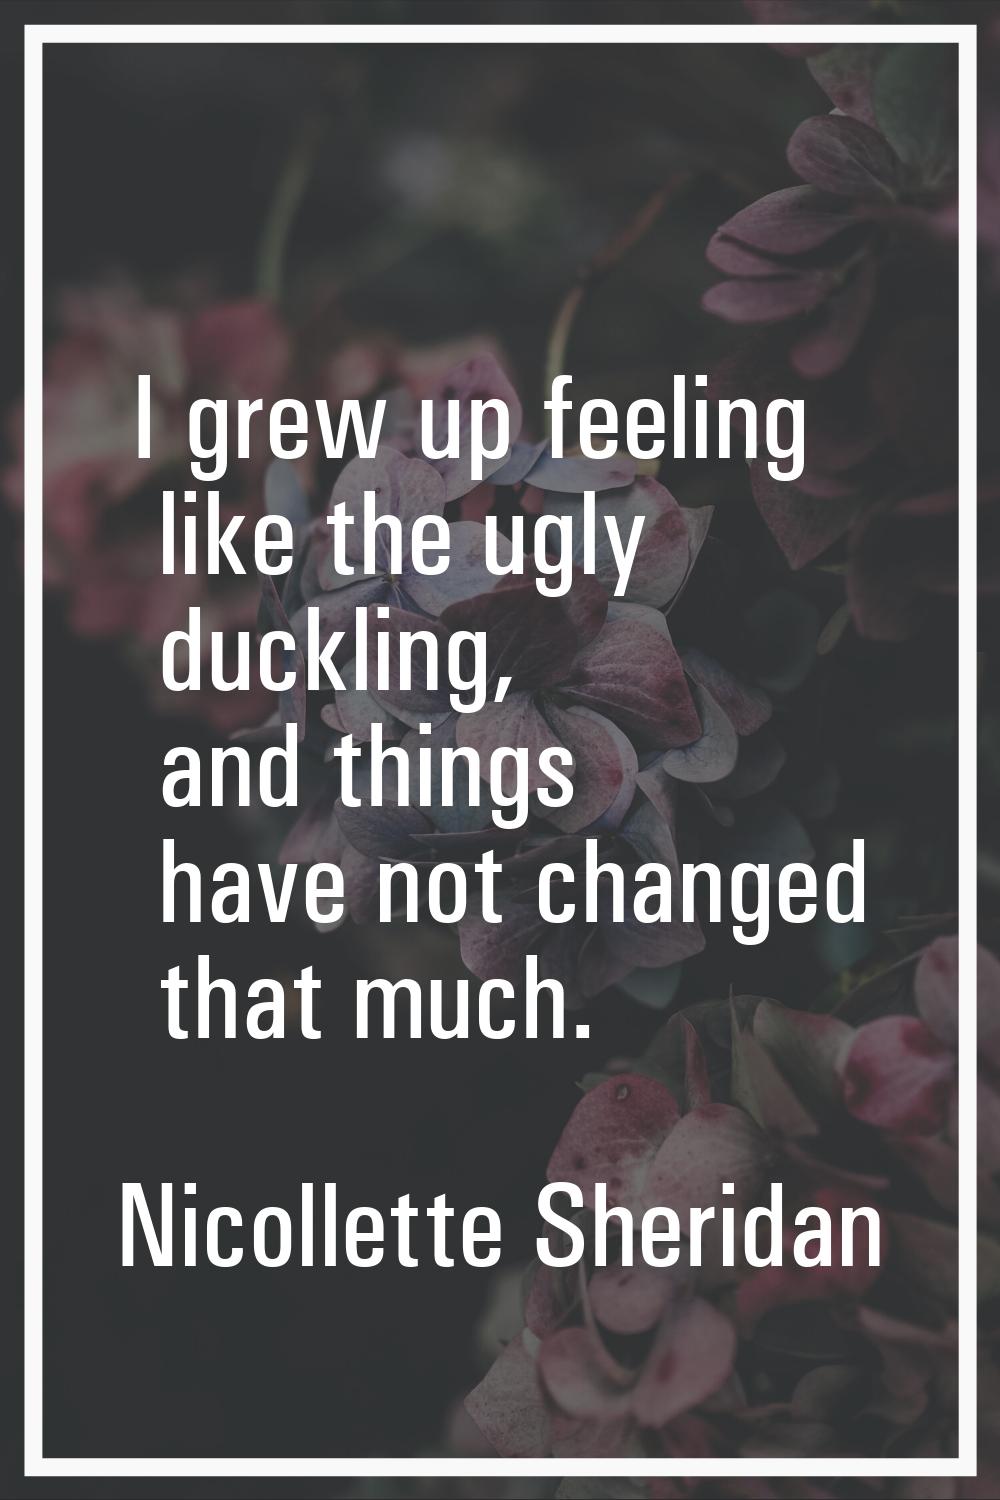 I grew up feeling like the ugly duckling, and things have not changed that much.